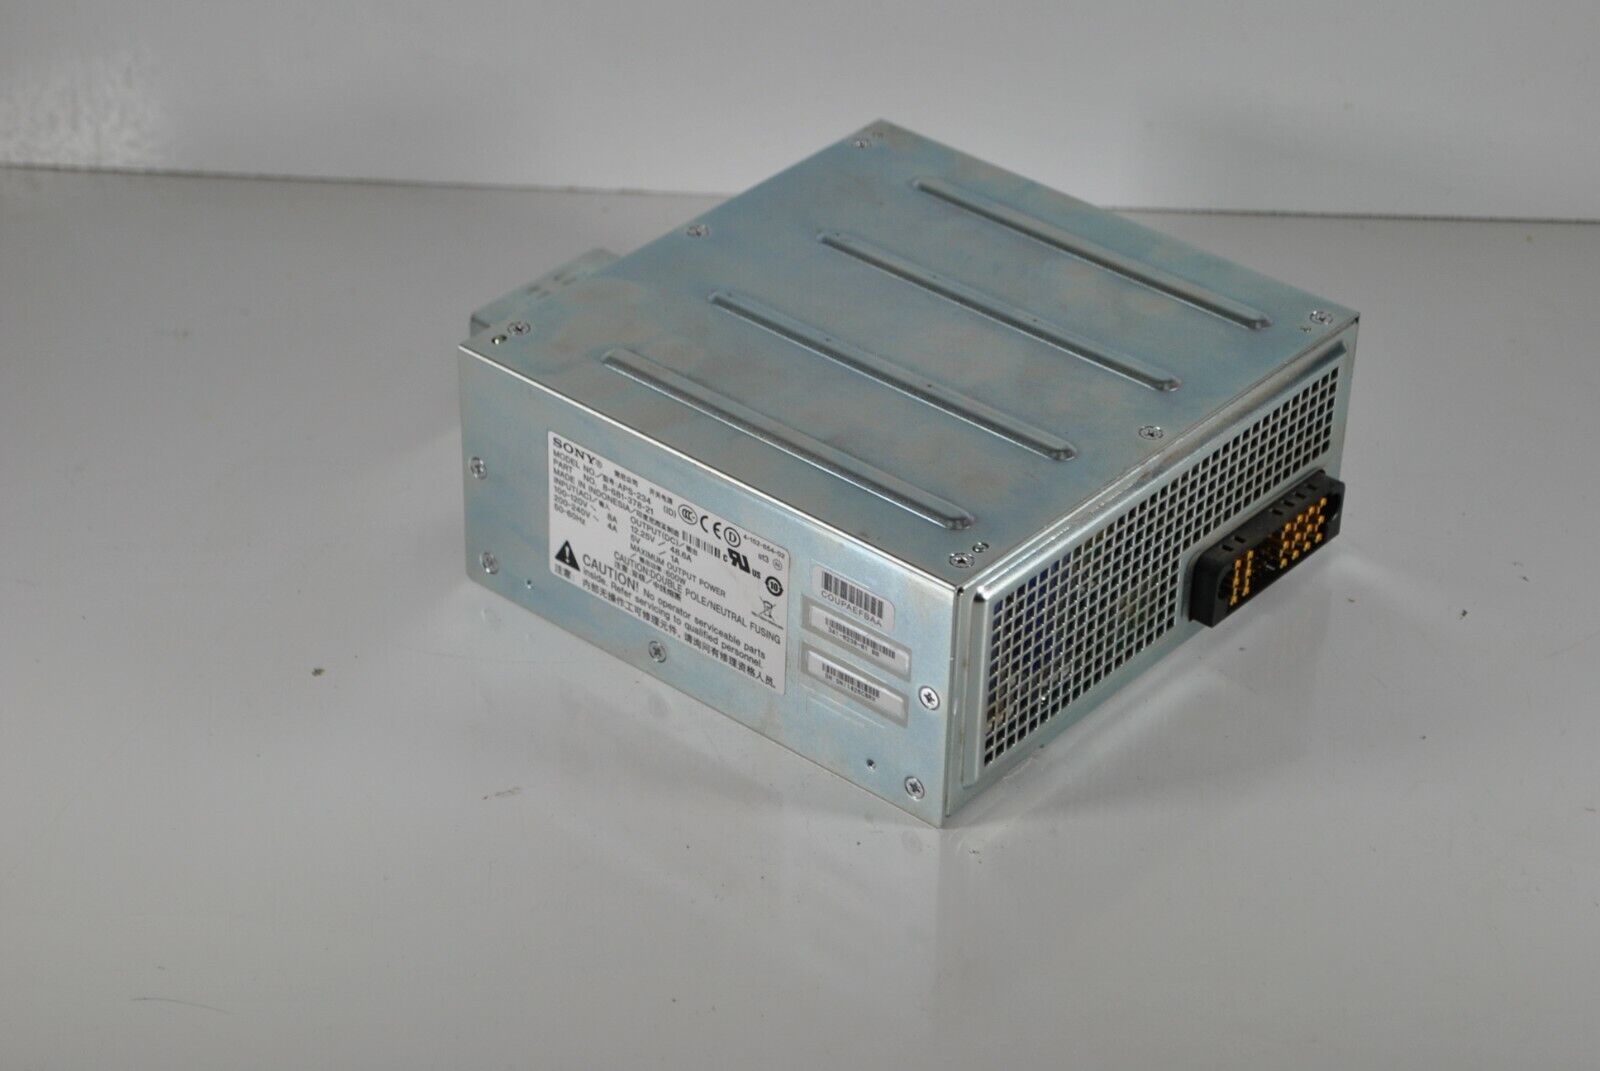 Cisco Sony 8-681-378-23 APS-234 Router Power Supply for Cisco Routers 3925/3945